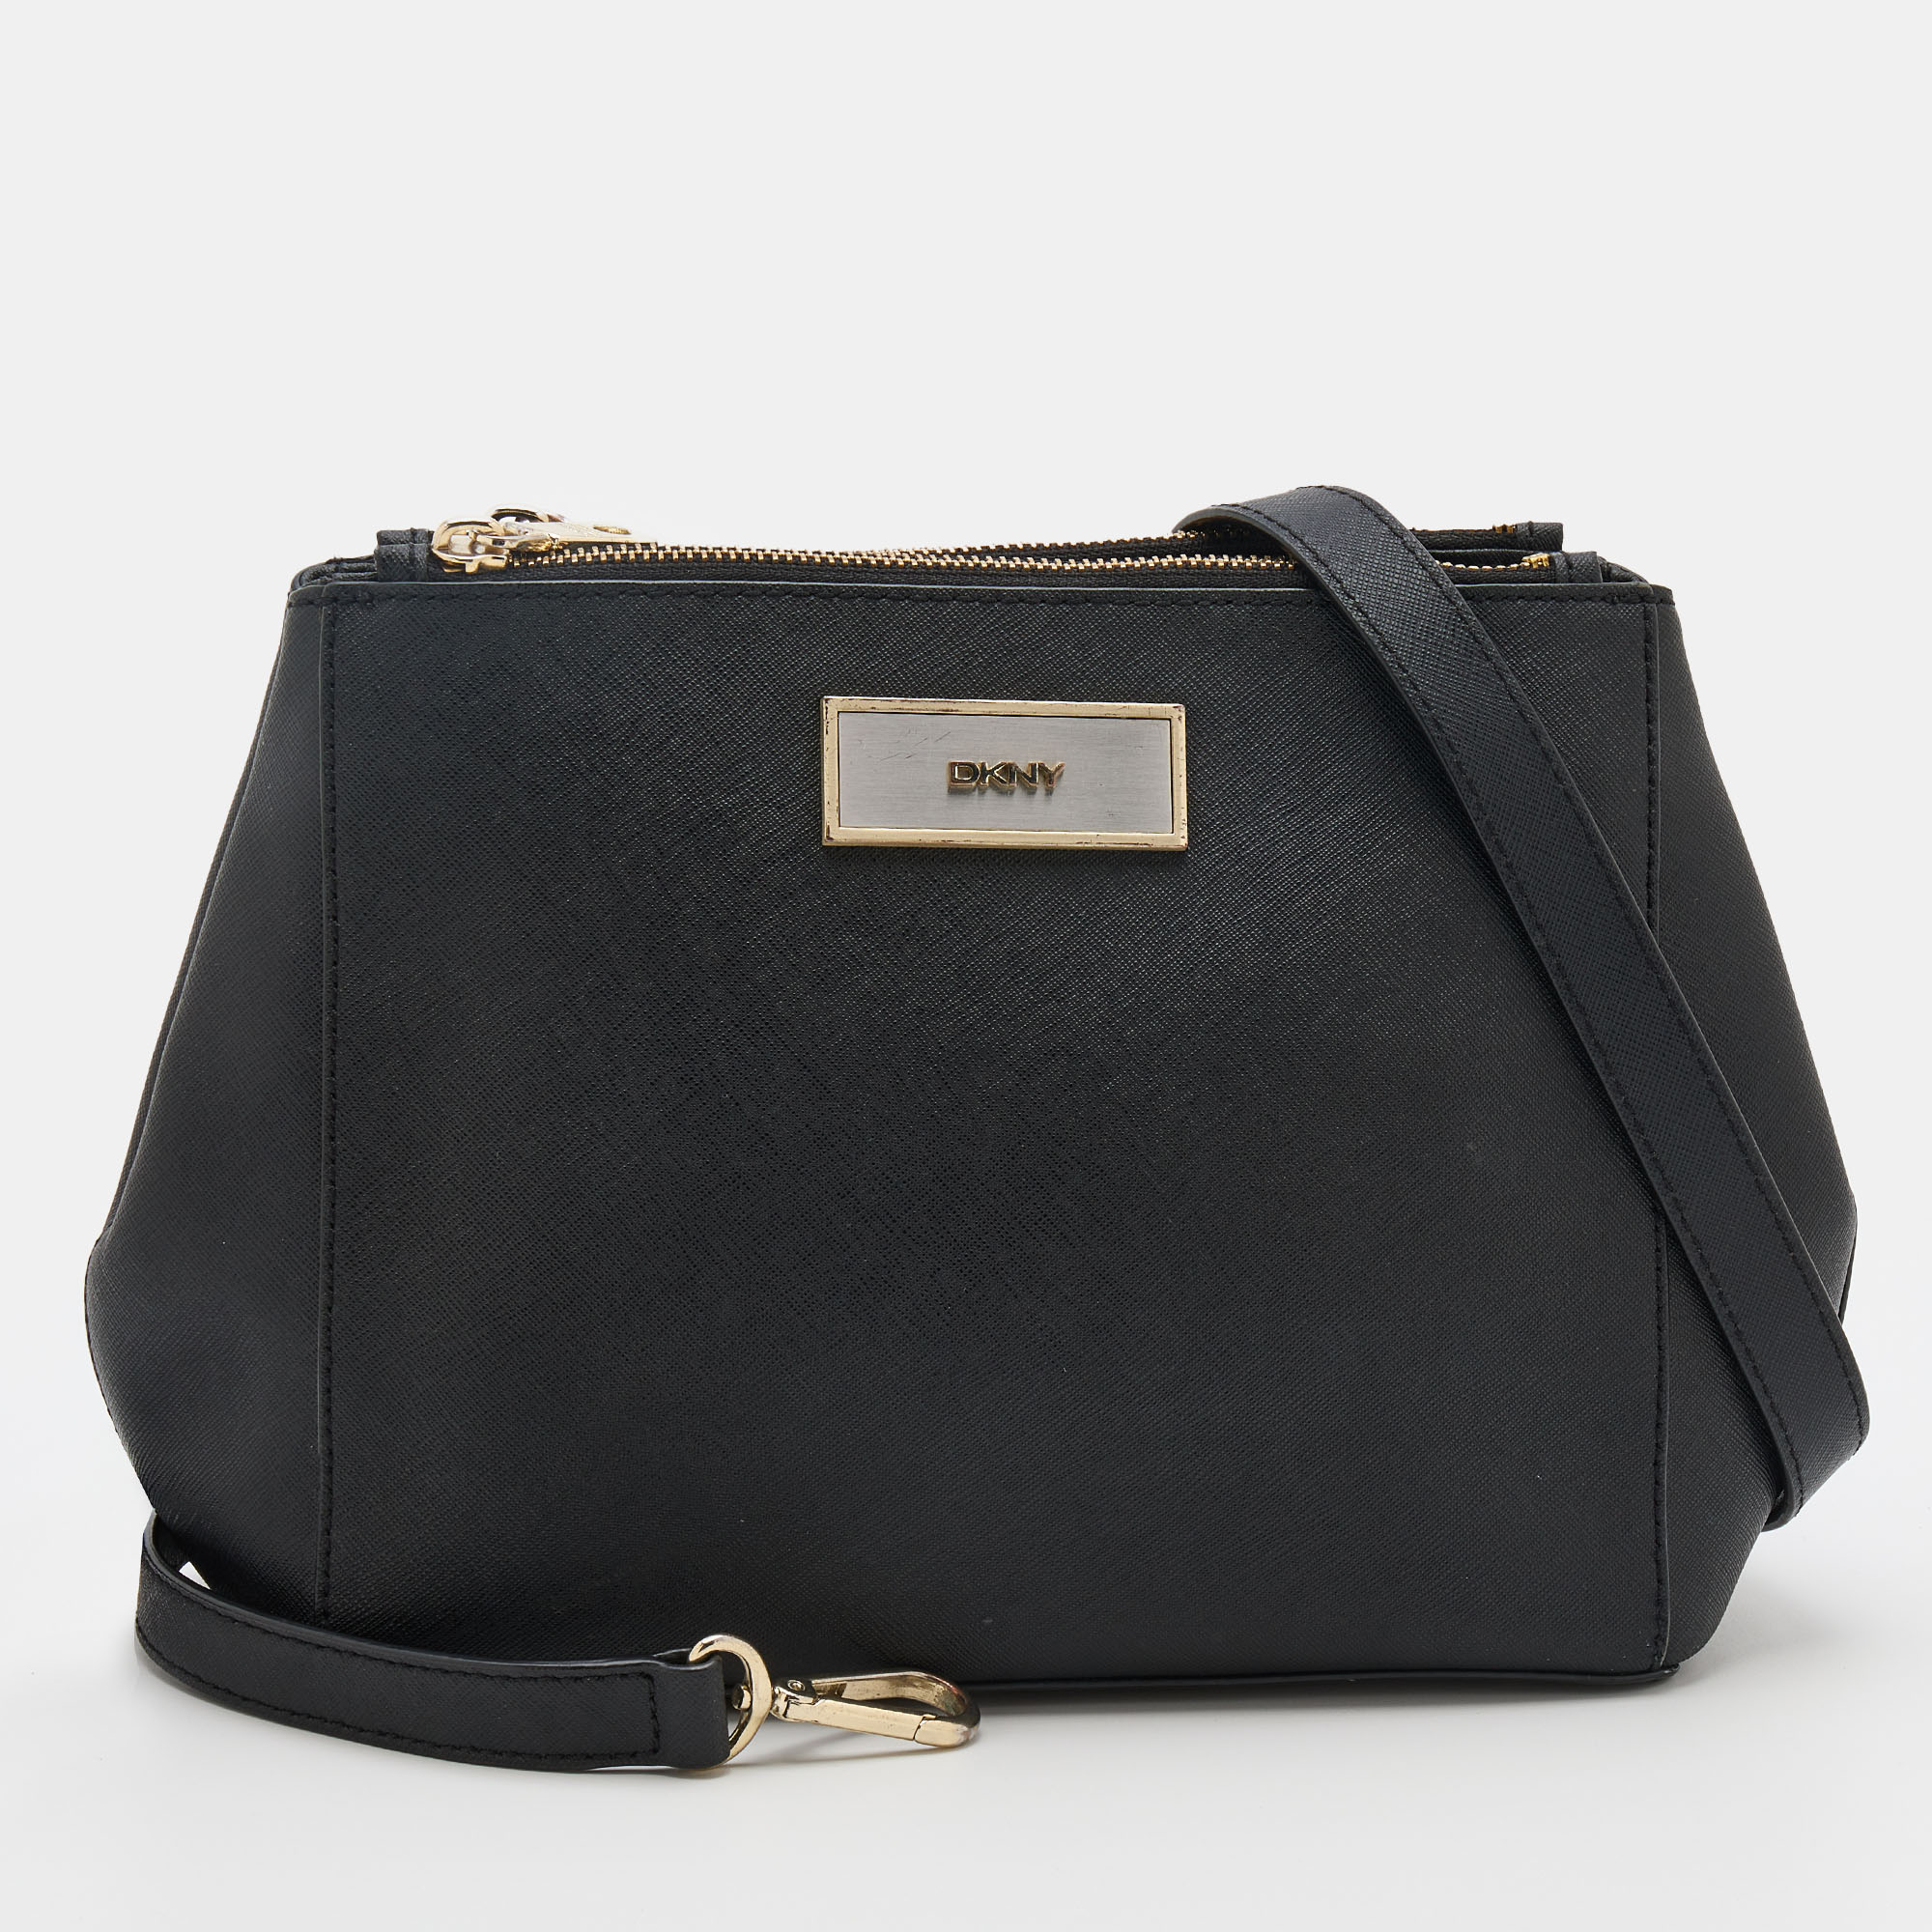 This DKNY bag perfectly combines fashion and function. Made from black leather it displays a shoulder strap a brand signature on the front and gold tone hardware. The spacious fabric lined interior makes it an ideal accessory for everyday use.